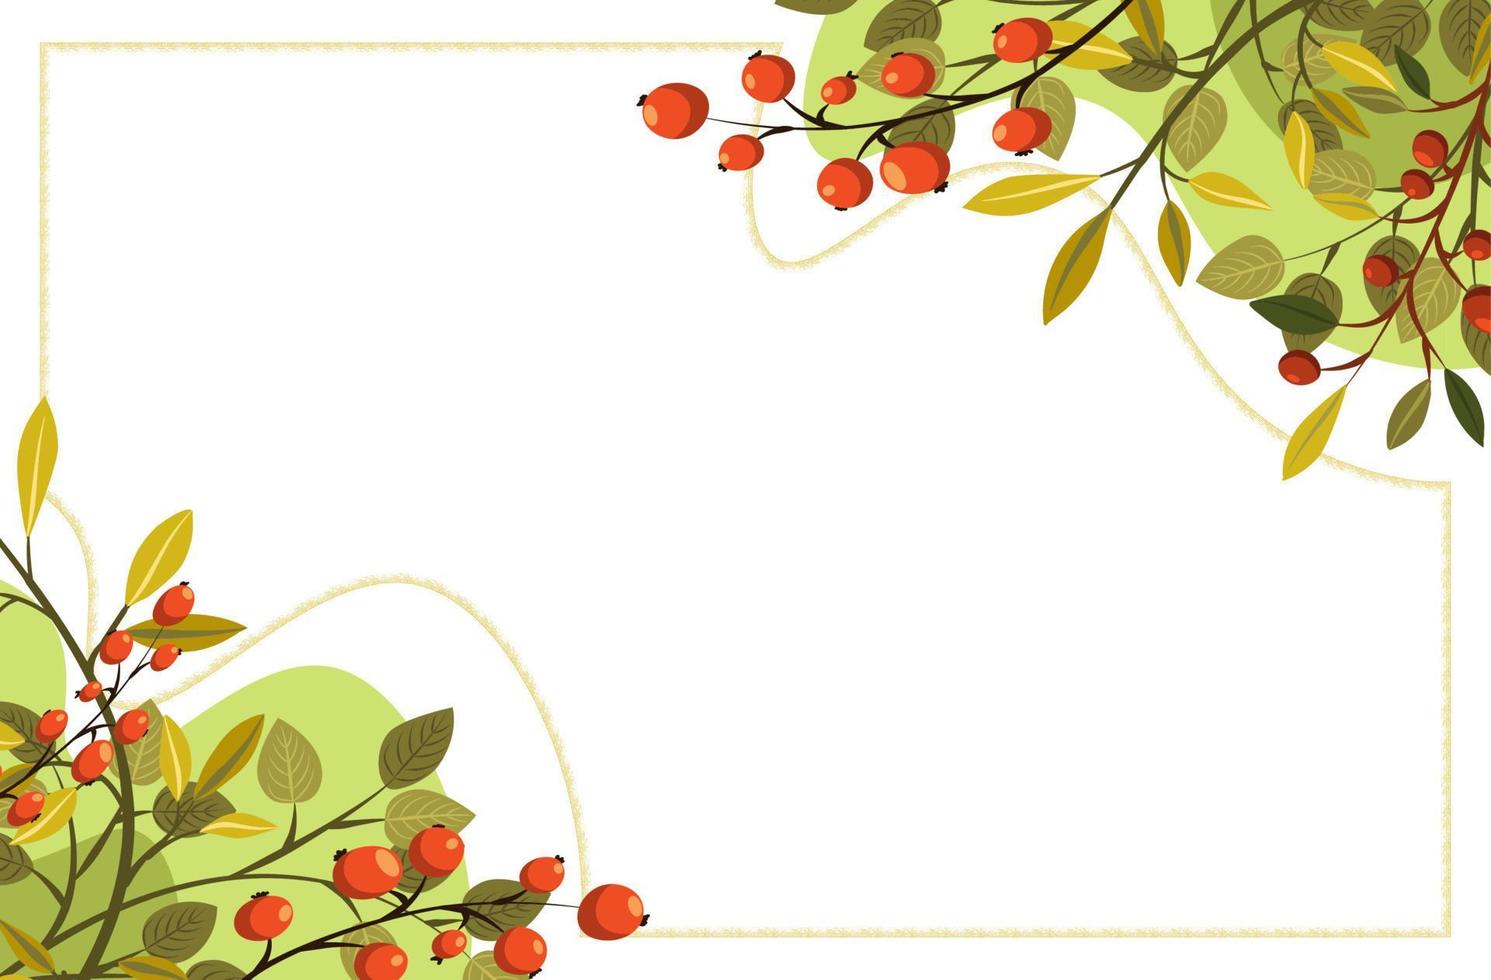 Seamless  background vector illustration of branches with leaves and berries for decoration